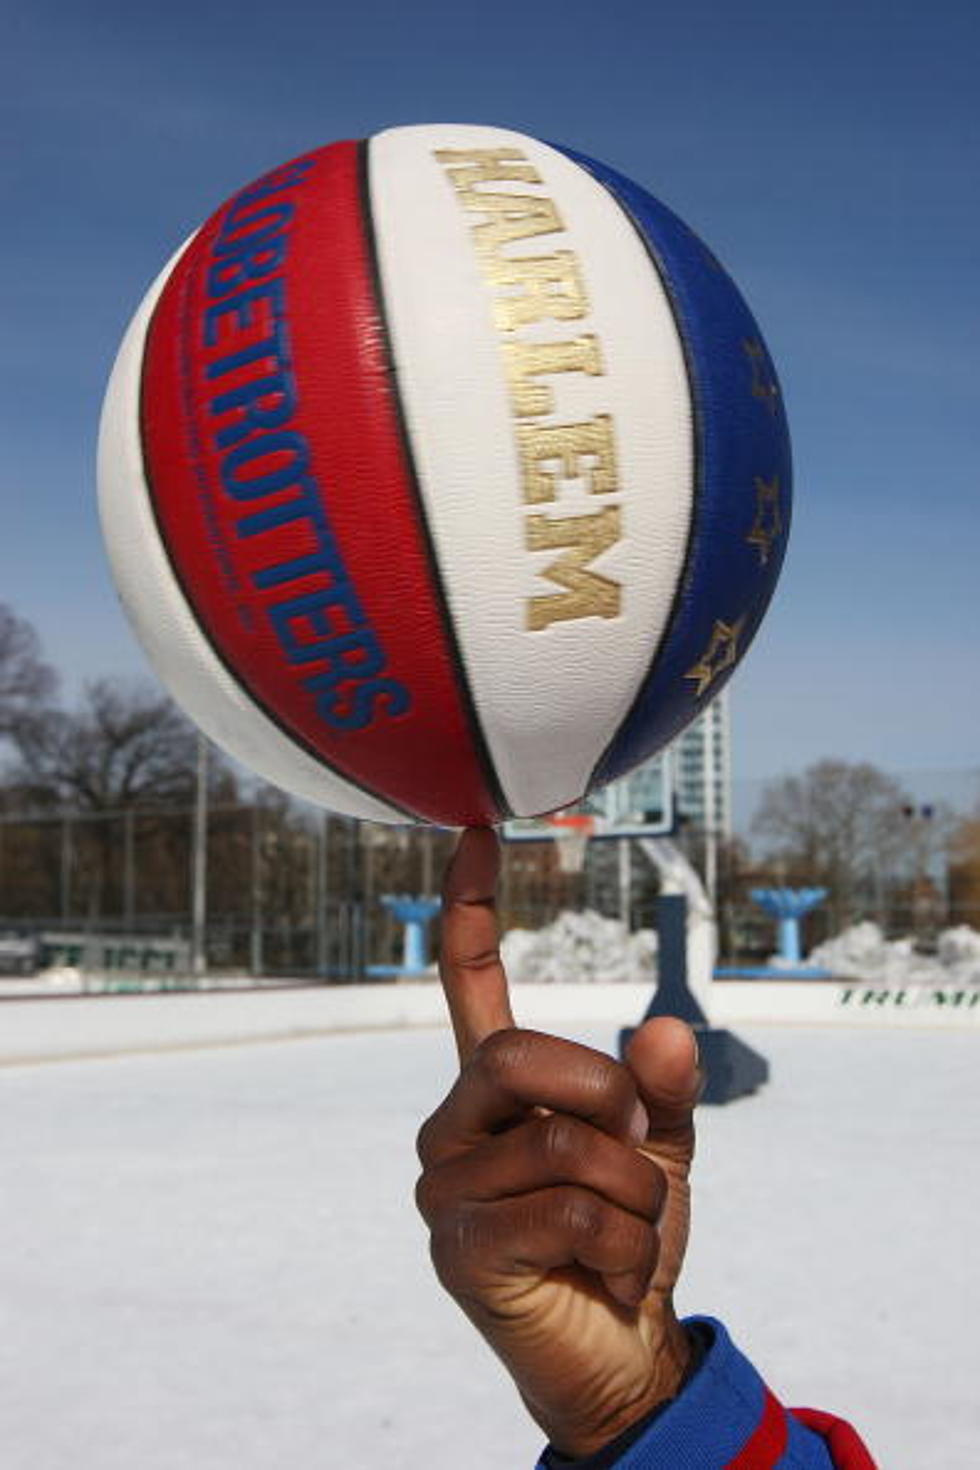 Harlem Globetrotters – Win Tickets And Get Autographs